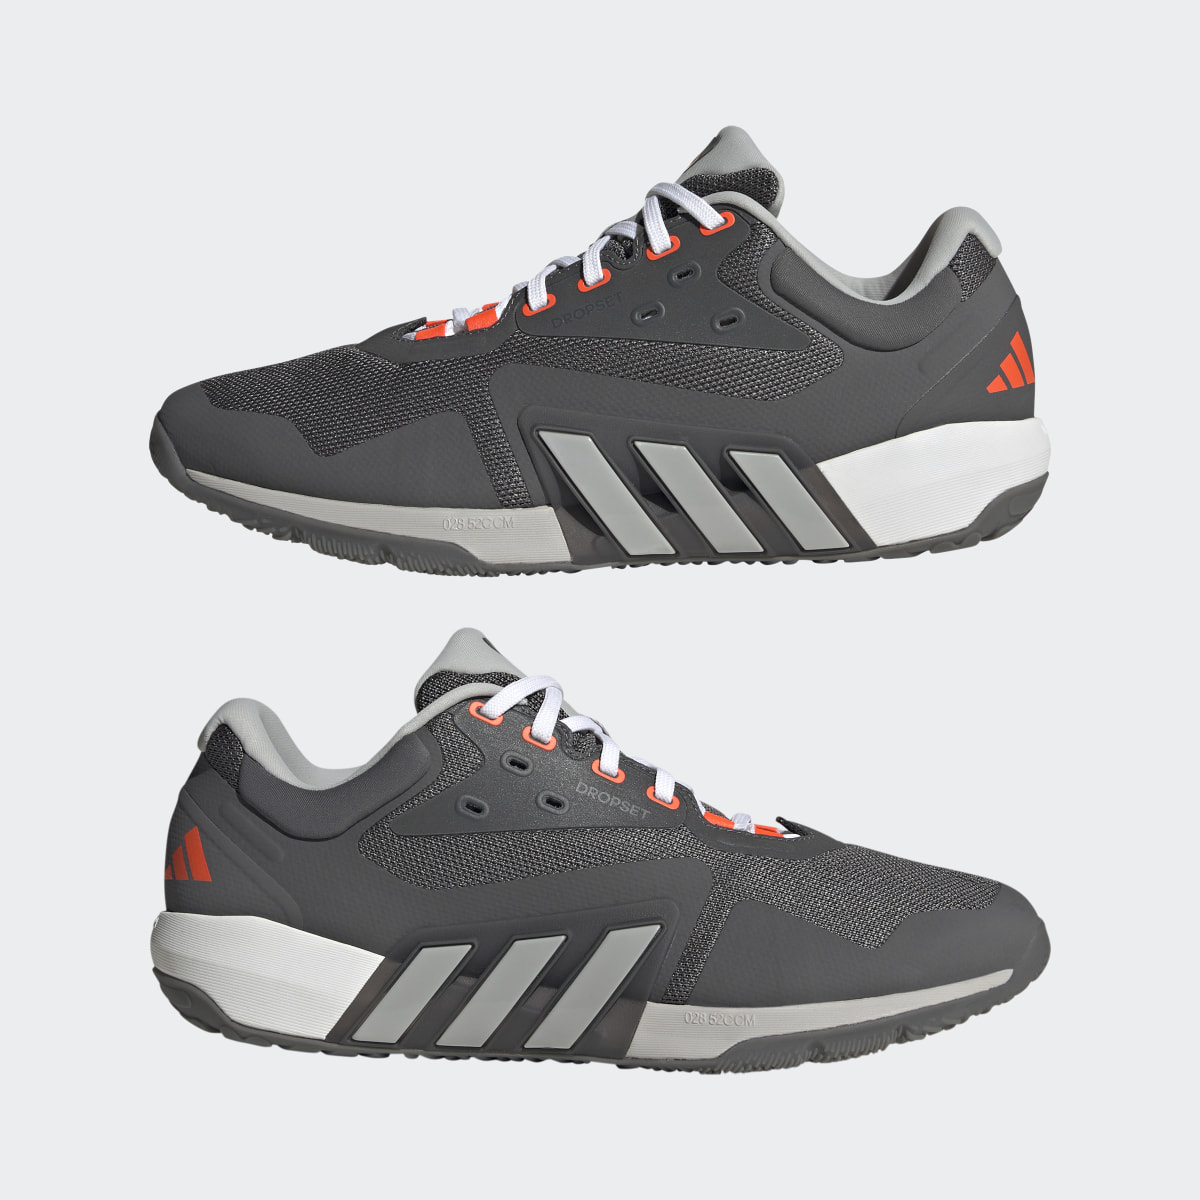 Adidas Dropset Trainer Shoes. 11